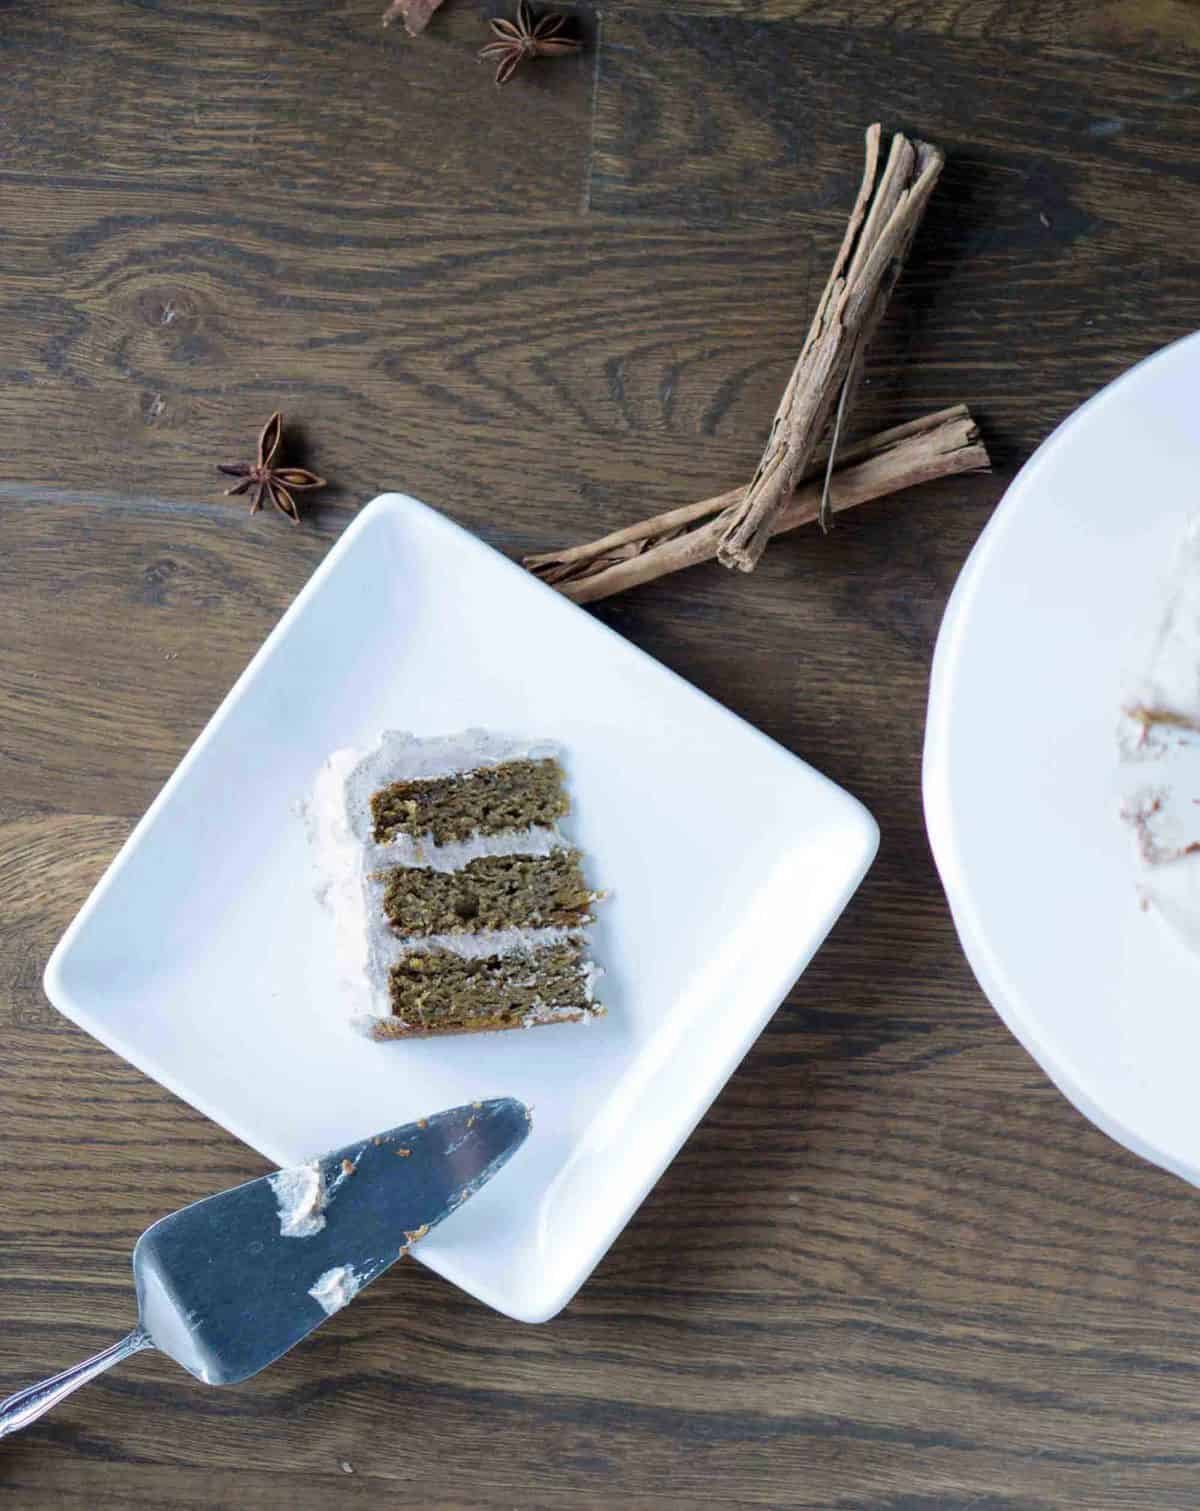 pumpkin spice cake with coconut whipe cream thats gluten free, dairy free, refined sugar free and fluffy delicious